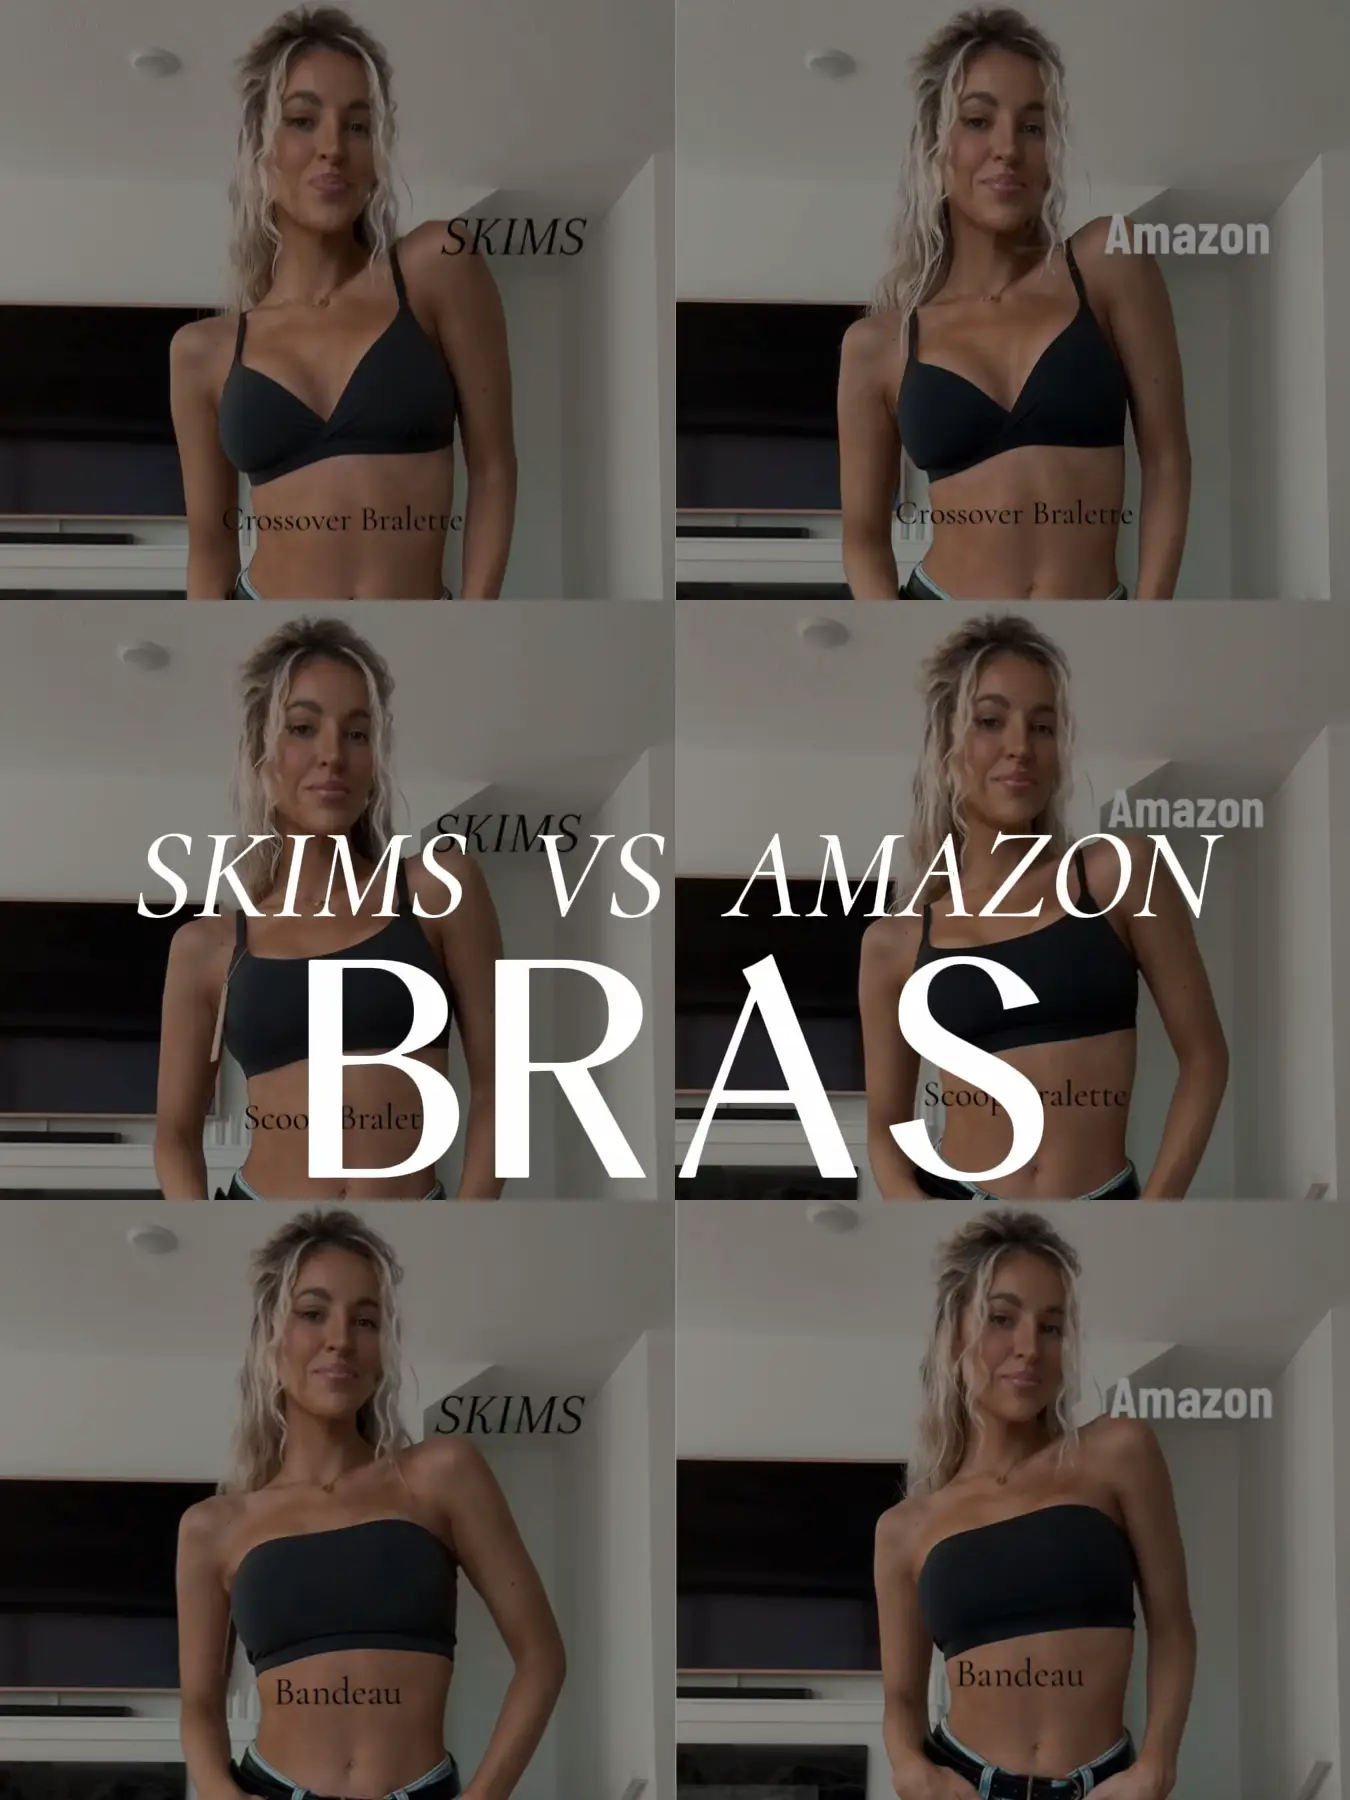 I weigh 150 lbs & did a Skims activewear haul - the leggings cost